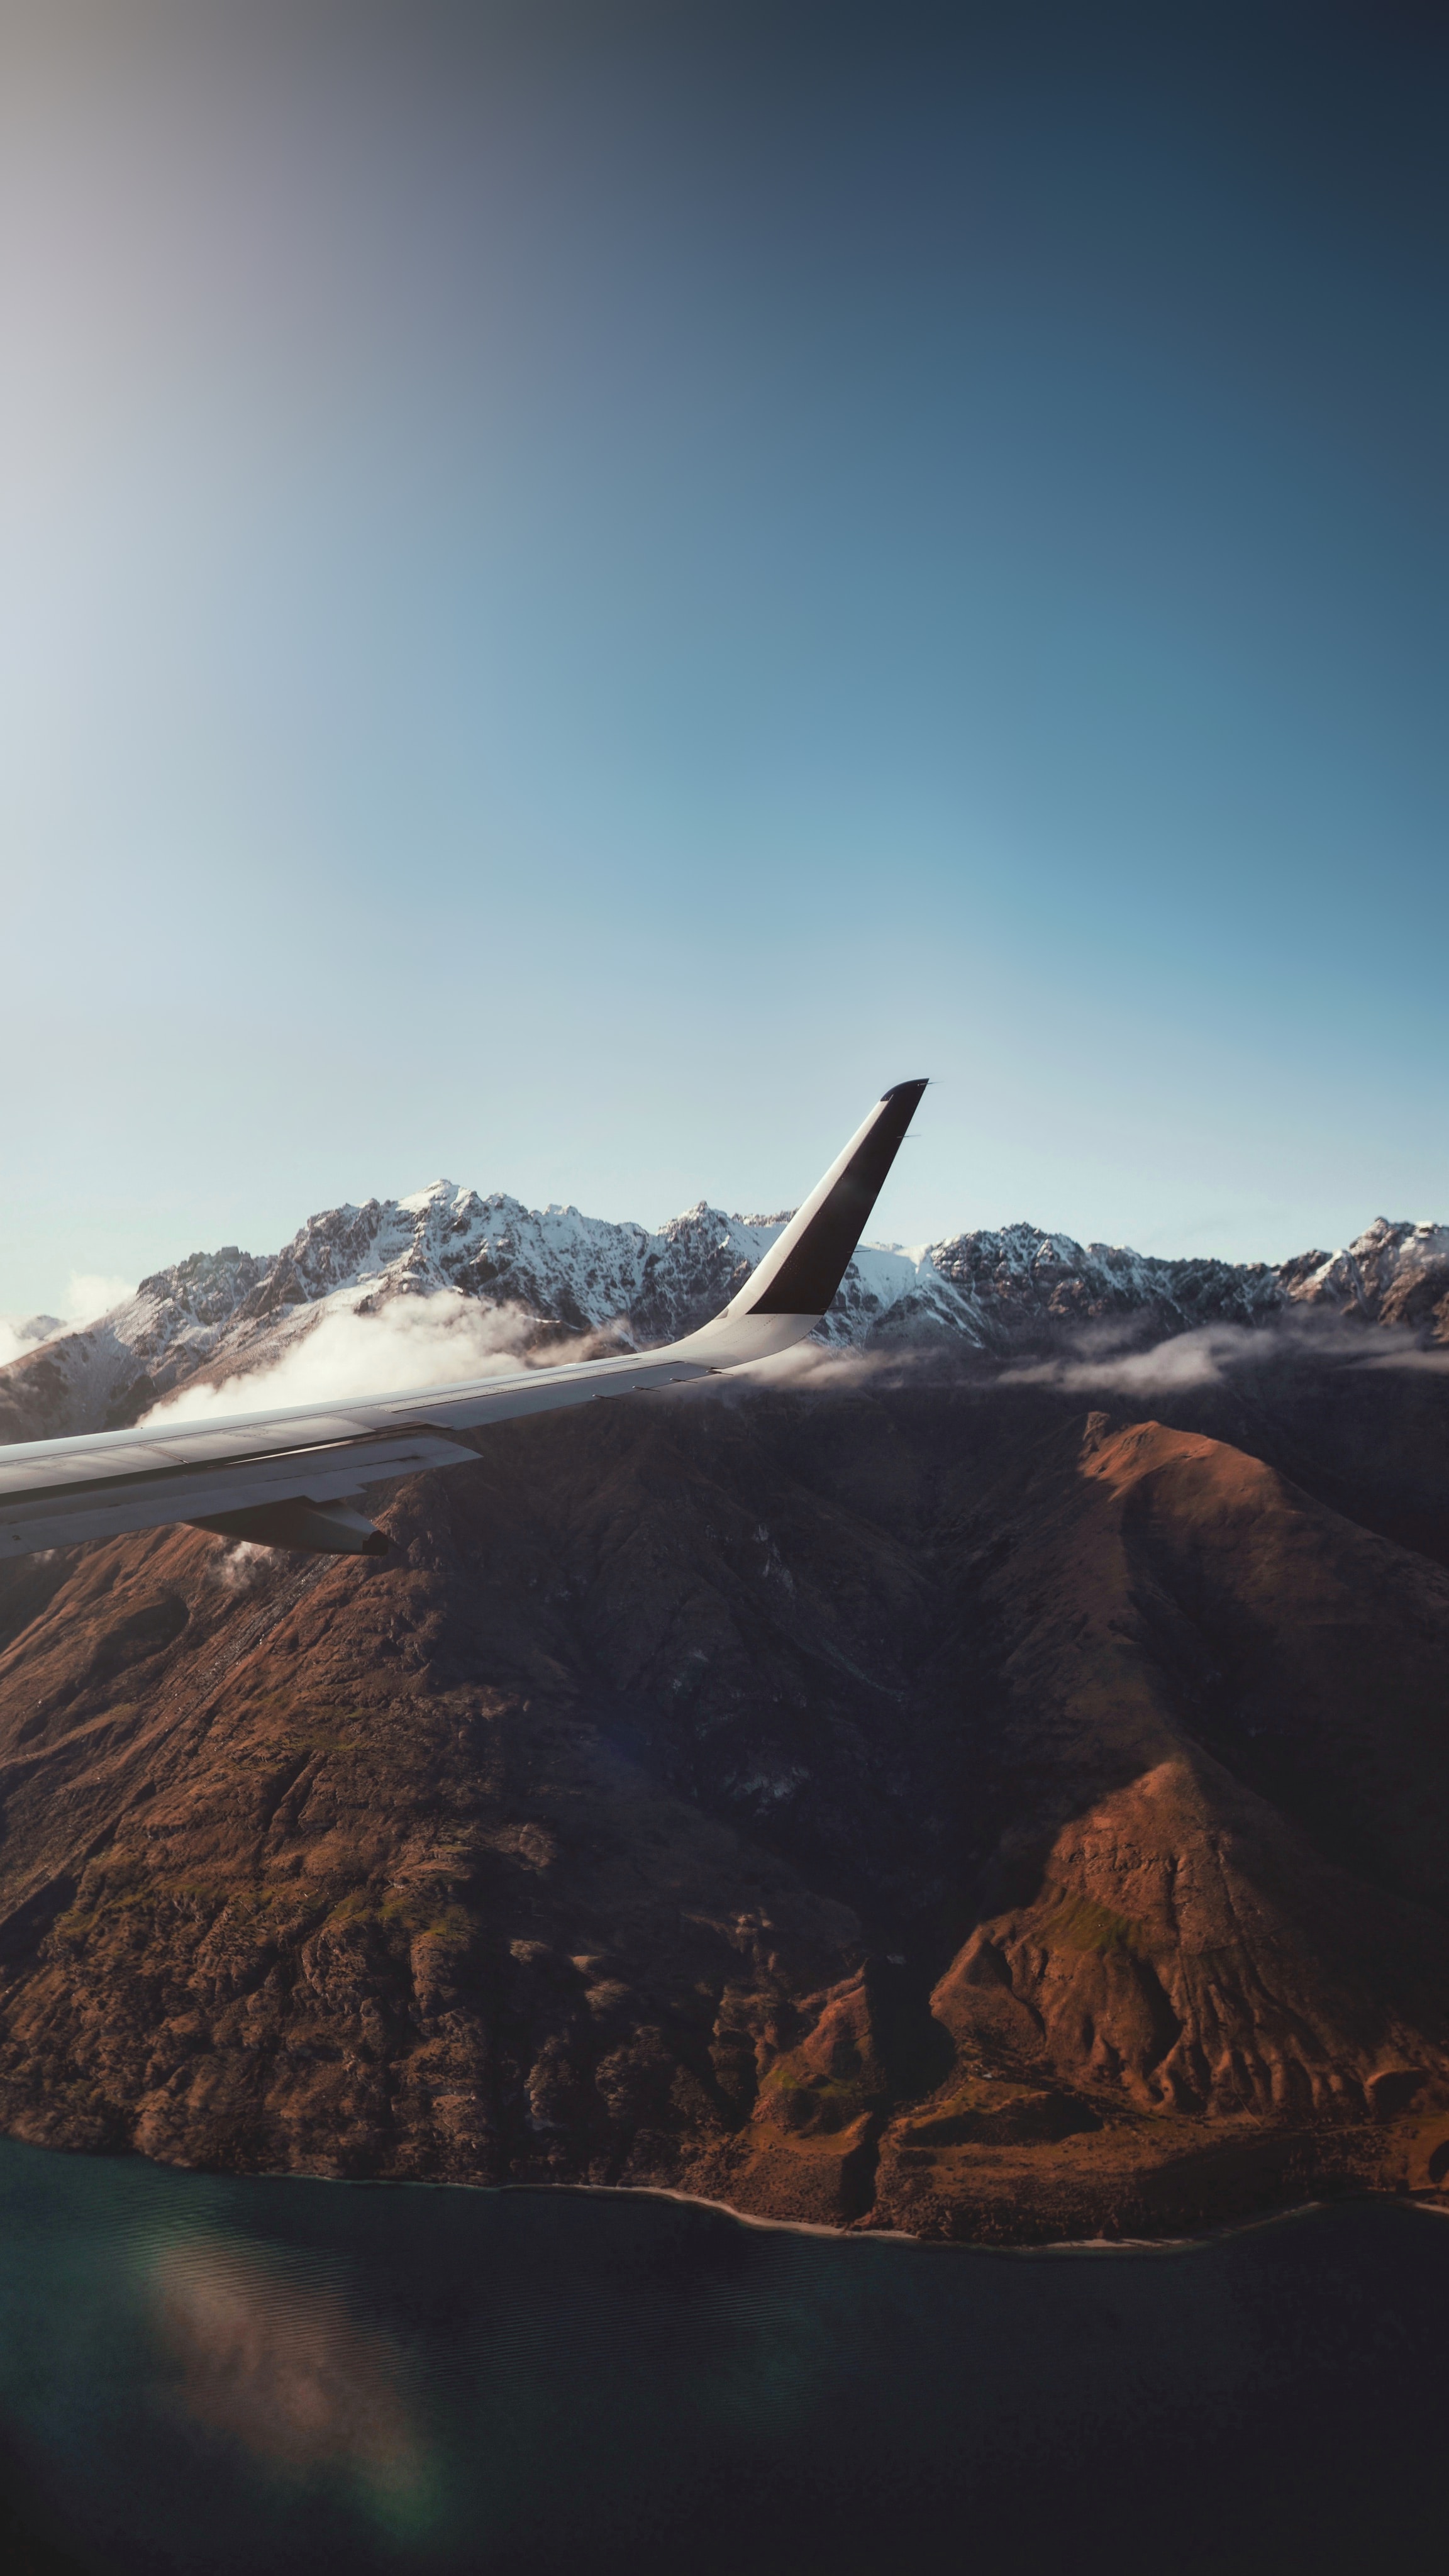 height, view, airplane, nature, mountains, wing, plane